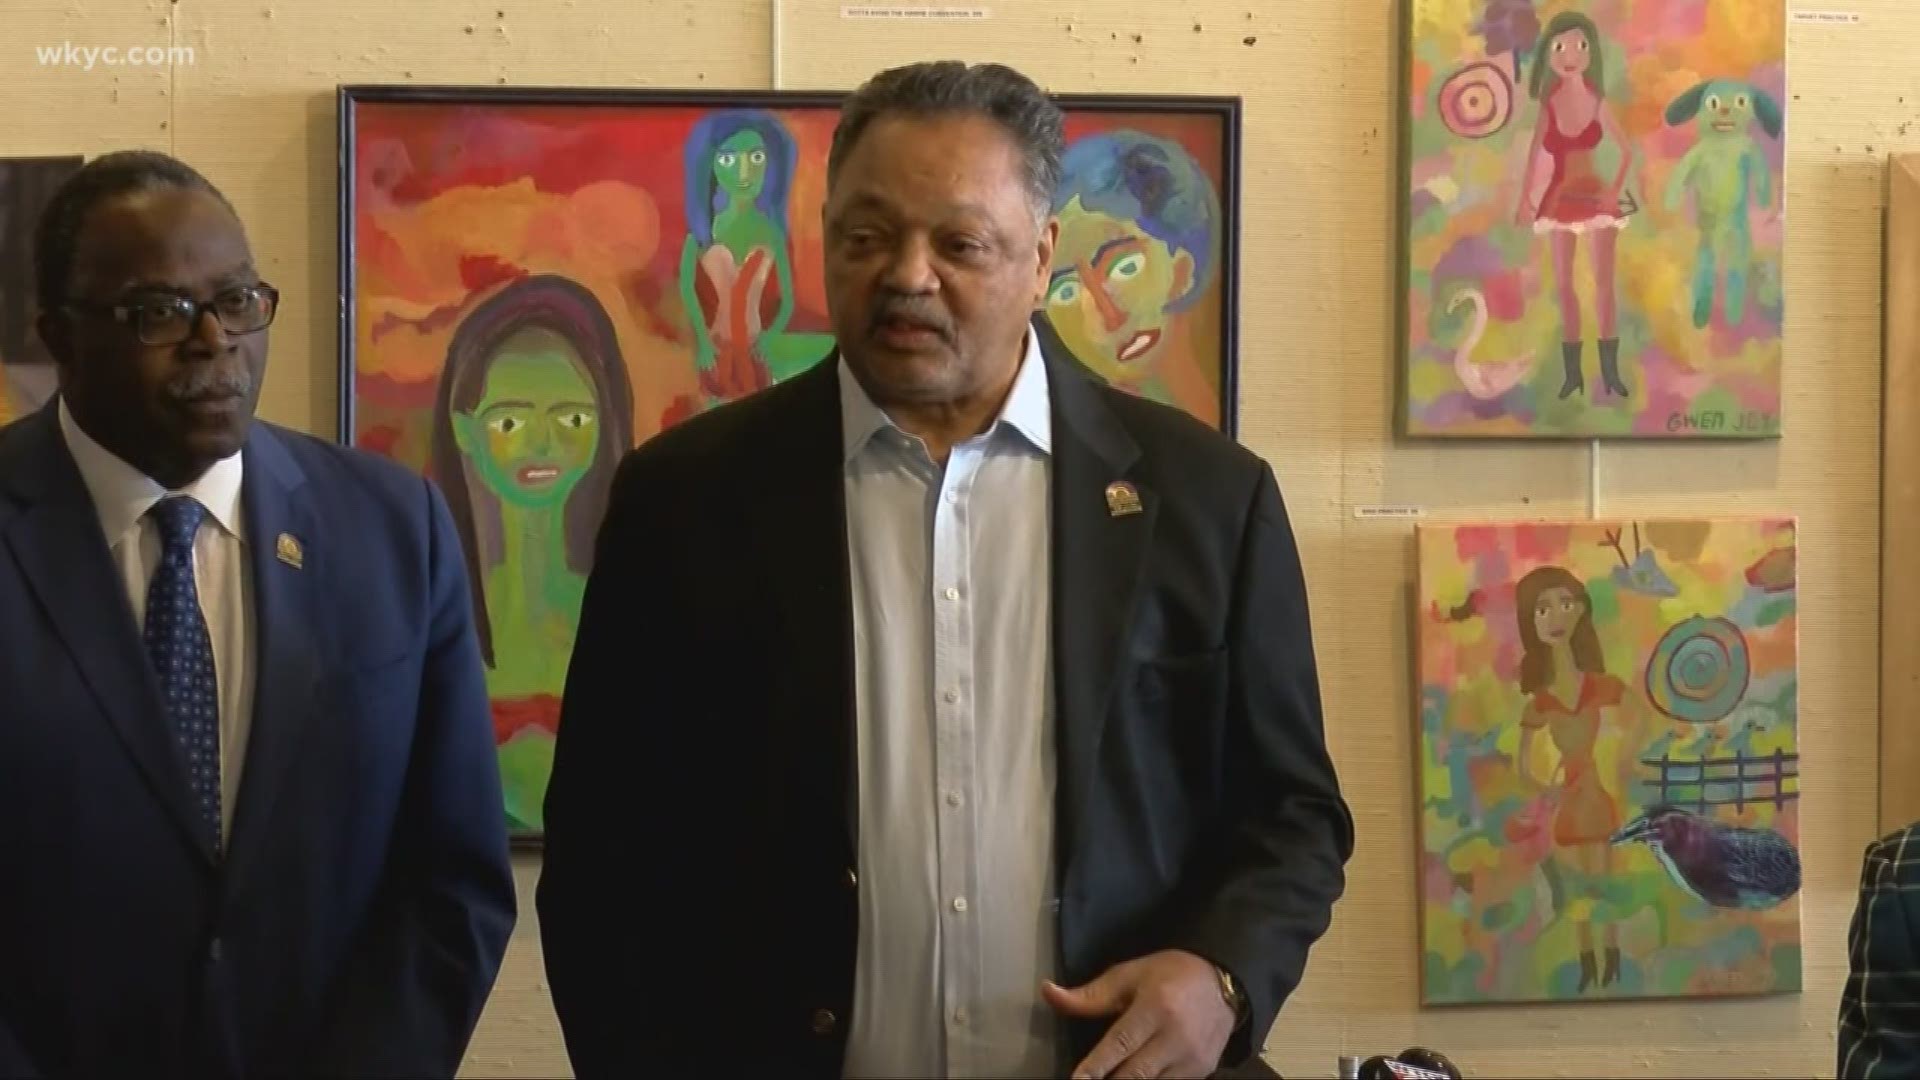 Jesse Jackson meets with GM workers, community leaders about racial threats at Toledo plant